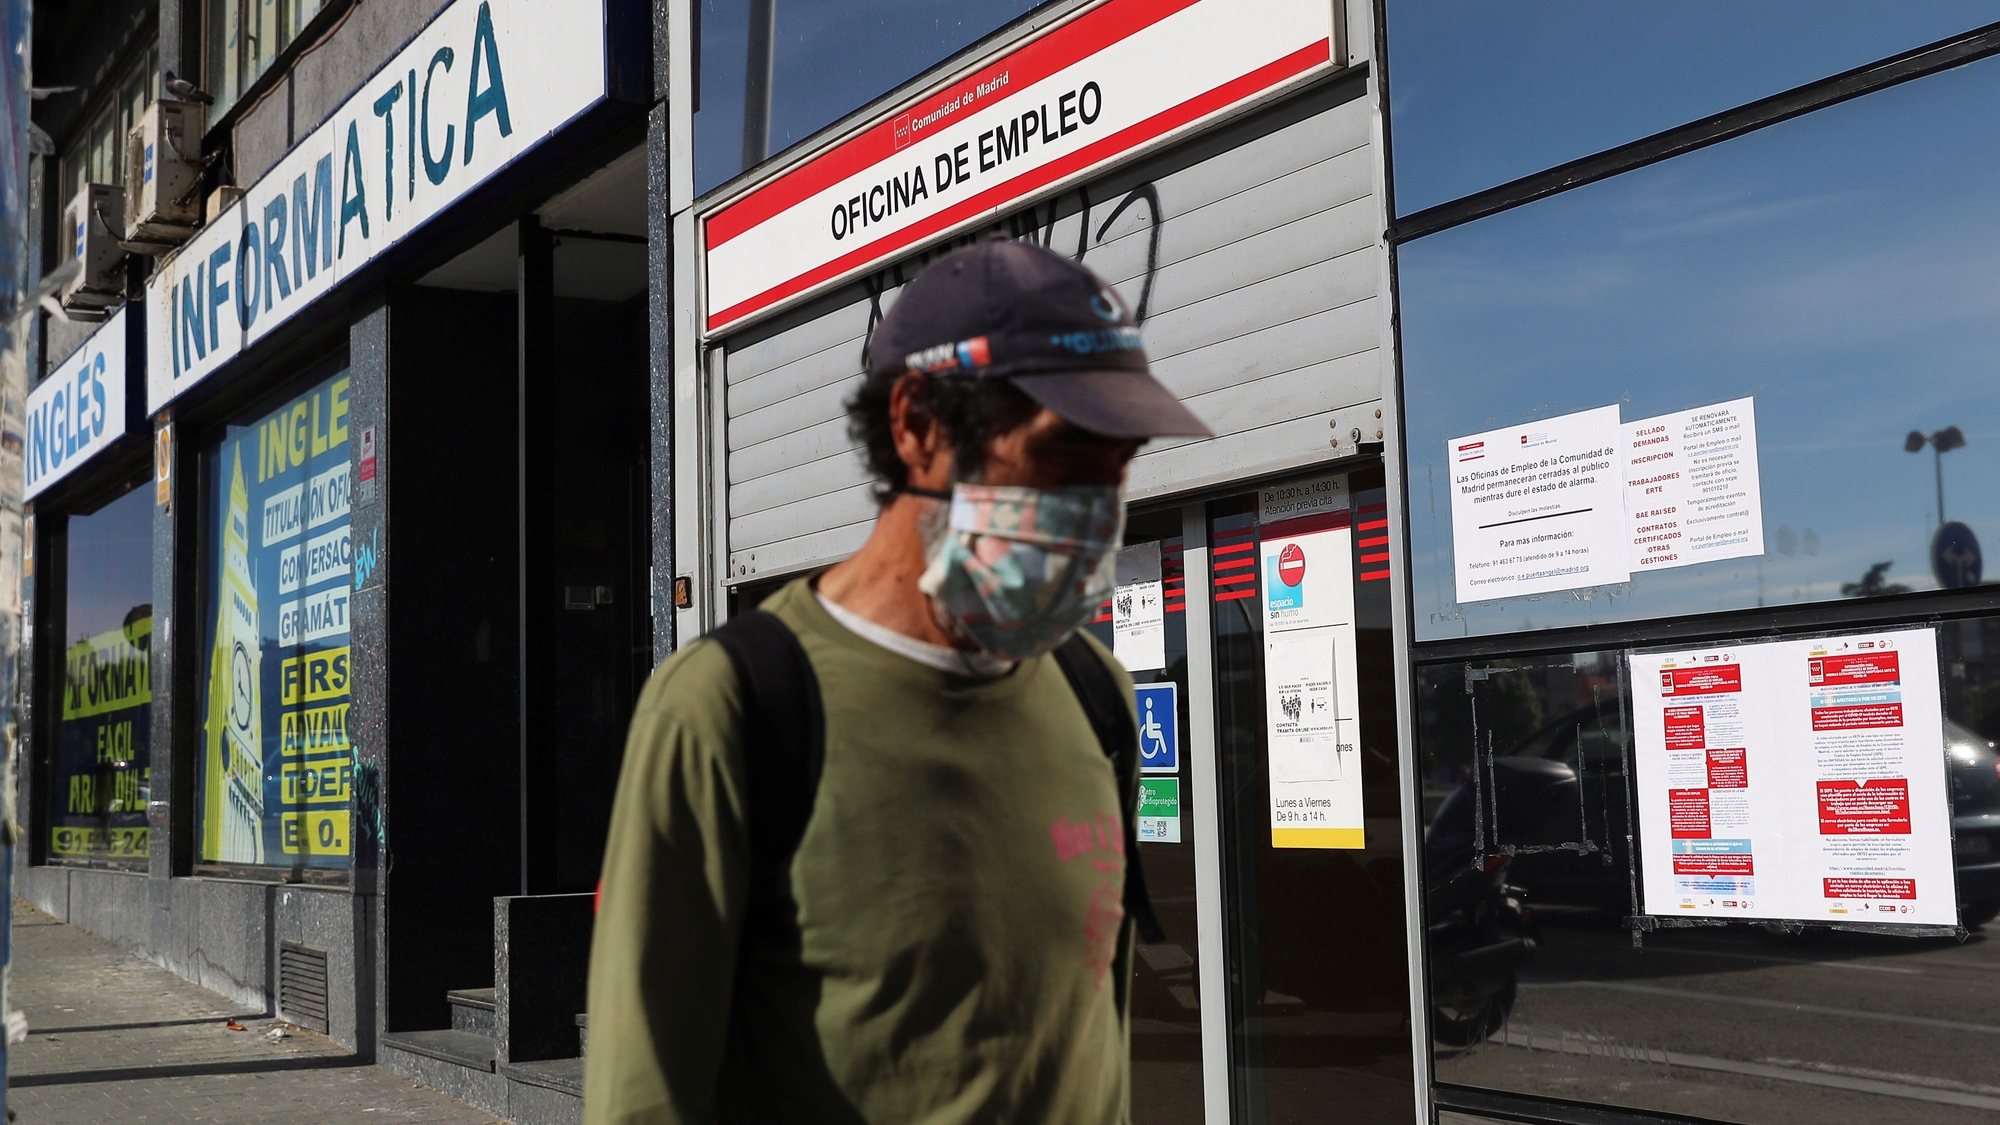 epa08402017 A man wearing a protective face mask walks past a public employment office in Madrid, Spain, 05 May 2020, amid the ongoing coronavirus COVID-19 pandemic. The number of unemployed people rose by 282,891 to reach 3.83 million in April, the highest figures reached in April since 2016. Spain is under lockdown in an attempt to fight the spread of the pandemic COVID-19 disease caused by the SARS-CoV-2 coronavirus.  EPA/RODRIGO JIMENEZ